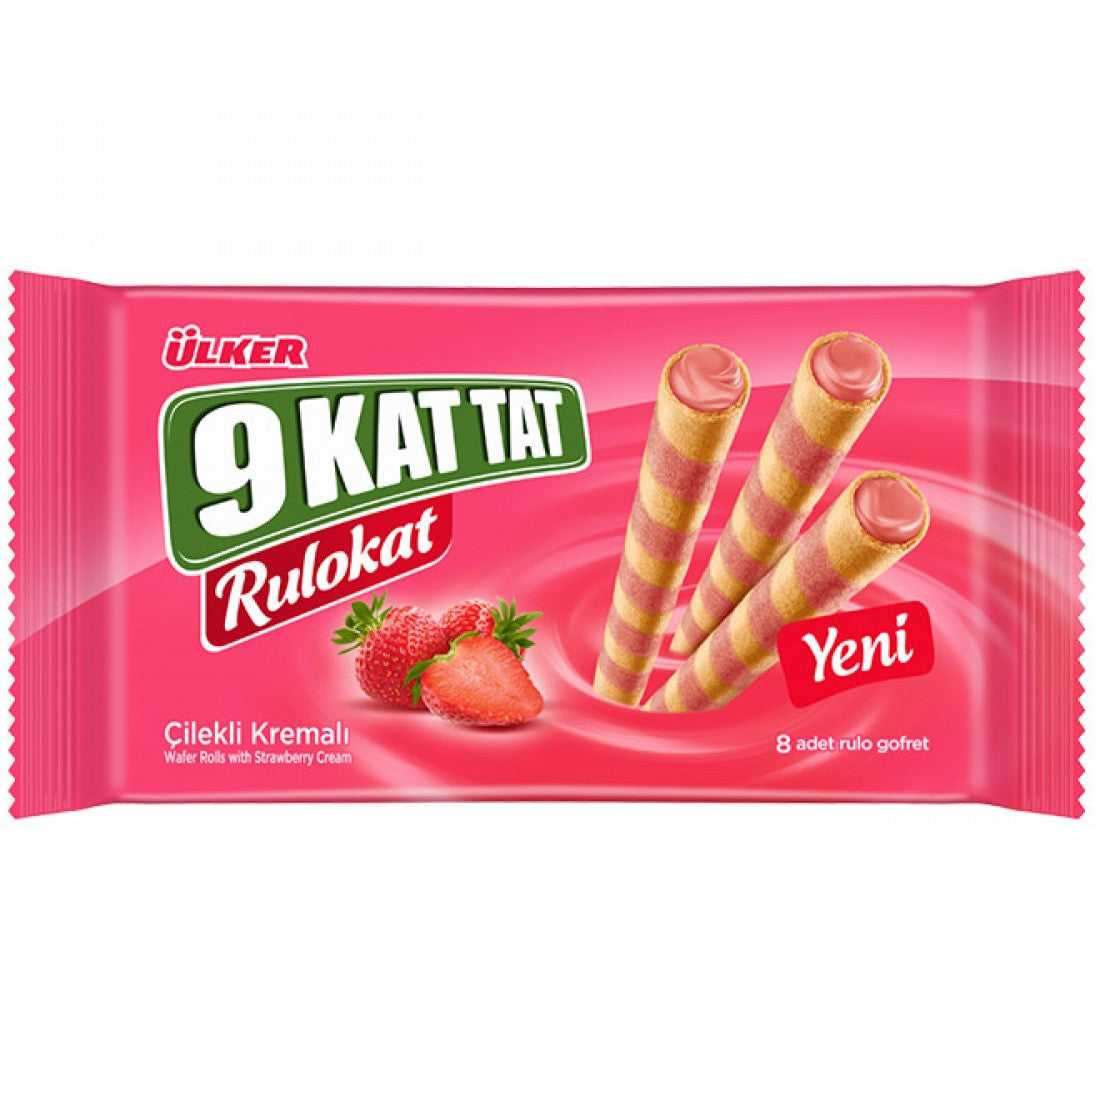 ULKER WAFER ROLLS WITH STRAWBERRY  CREAM